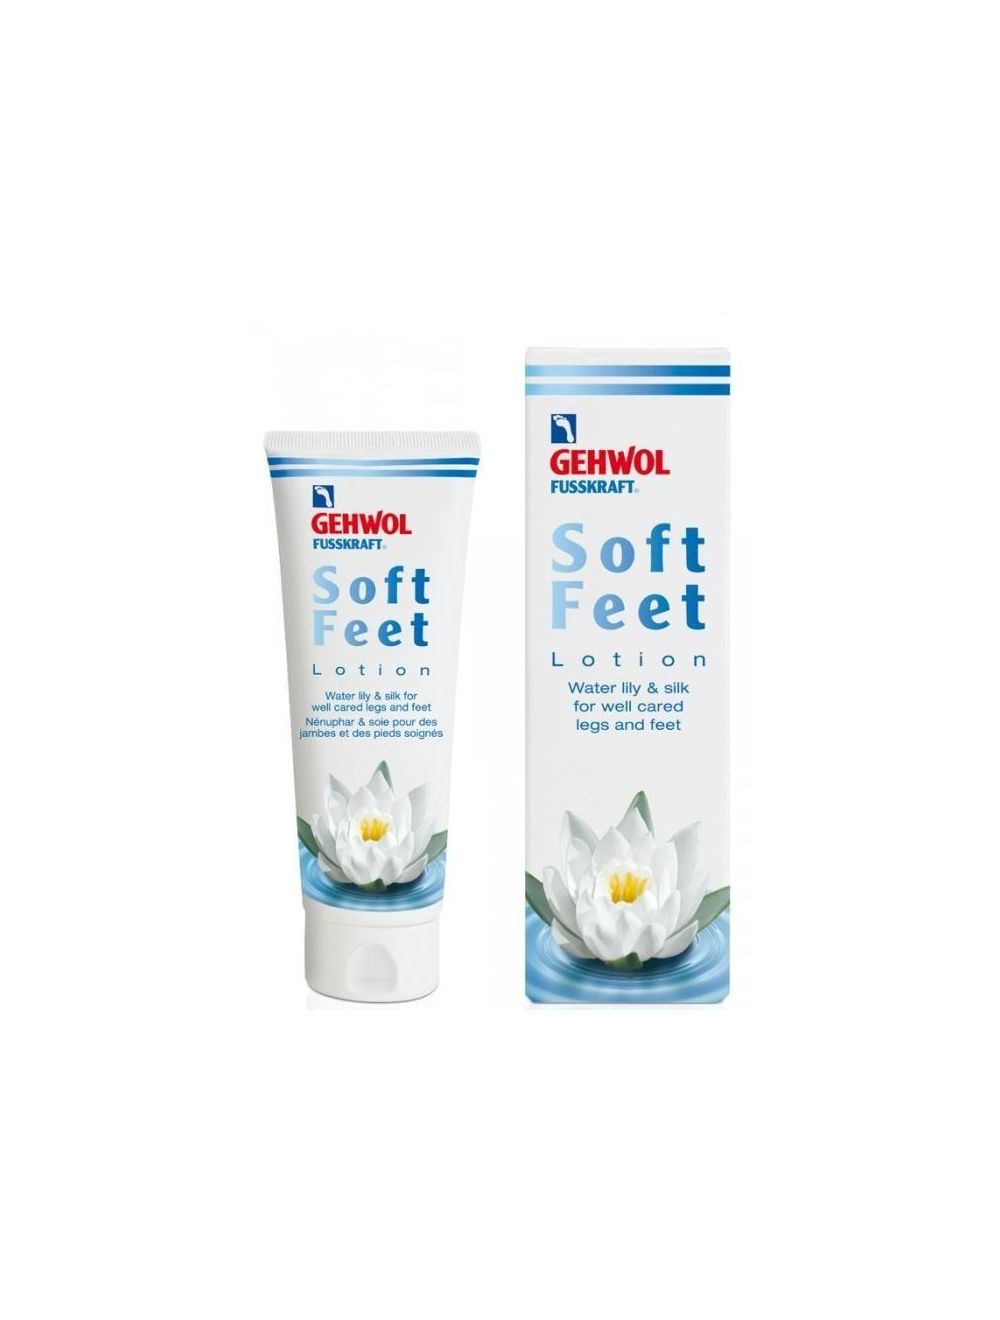 Gehwol Fusskraft Soft Feet Lotion Water Lily And Silk-Feet And Legs